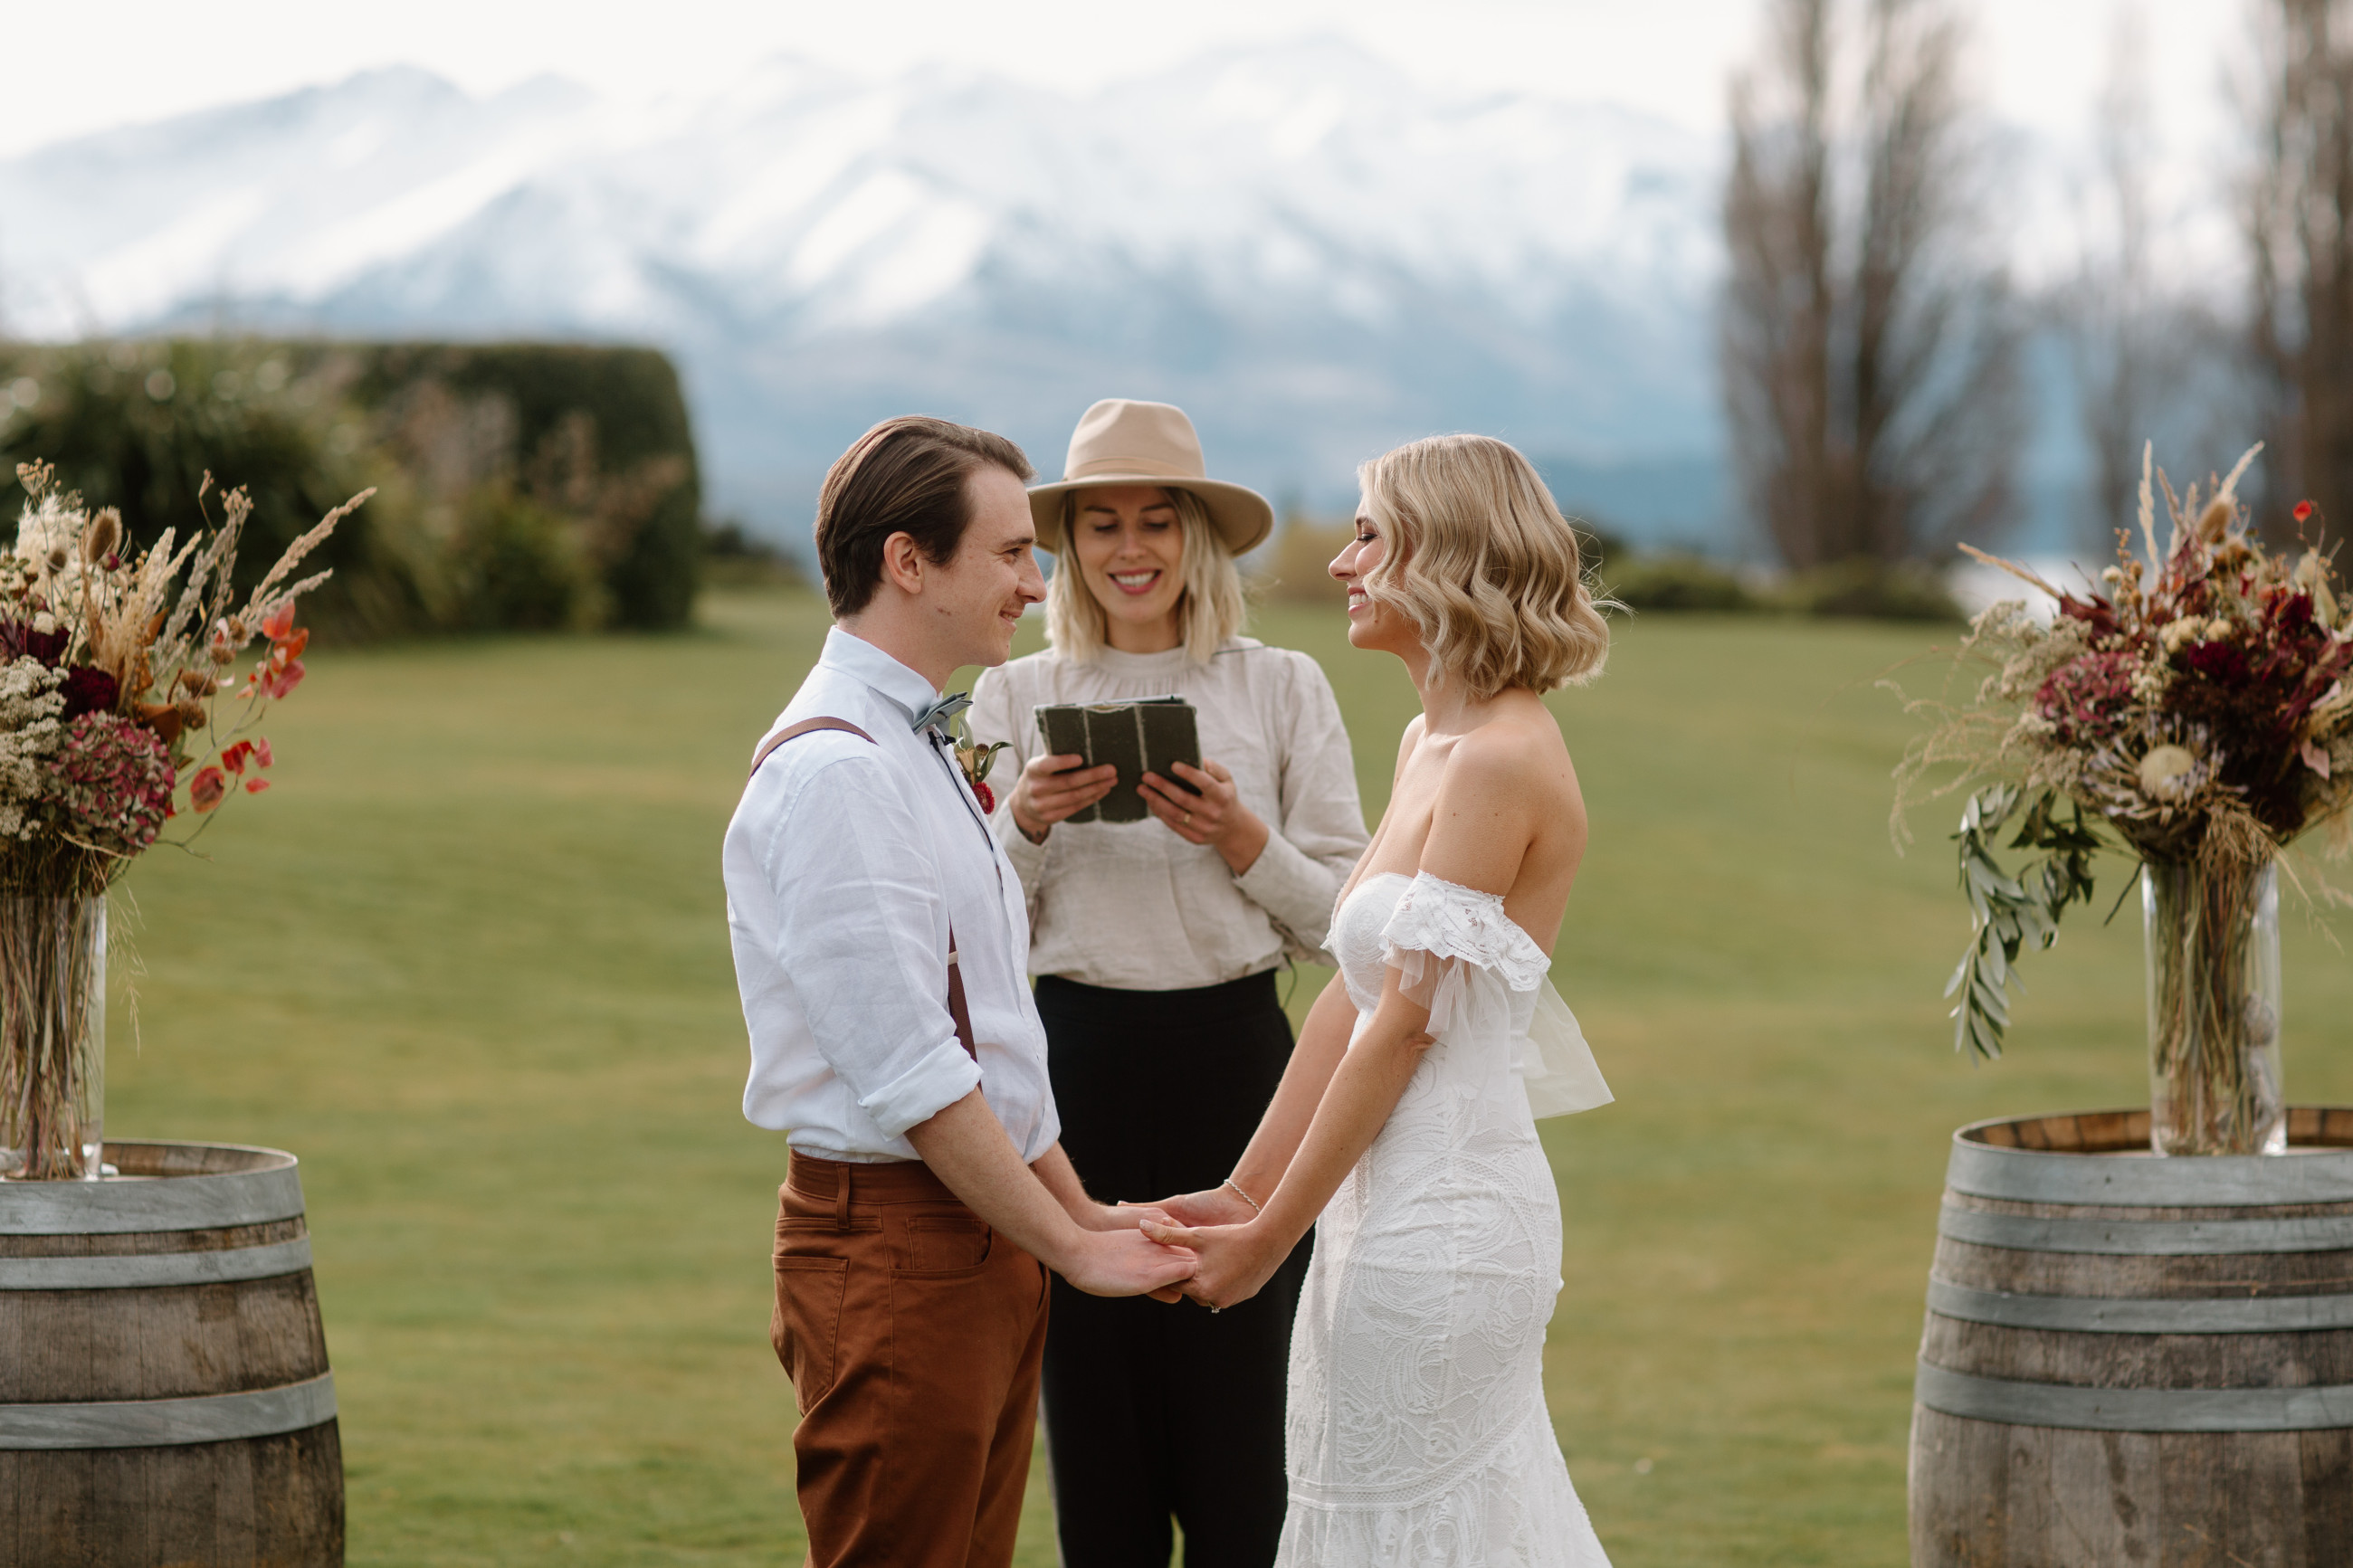 Edgewater lake wanaka is one of the wedding venues nz has to offer